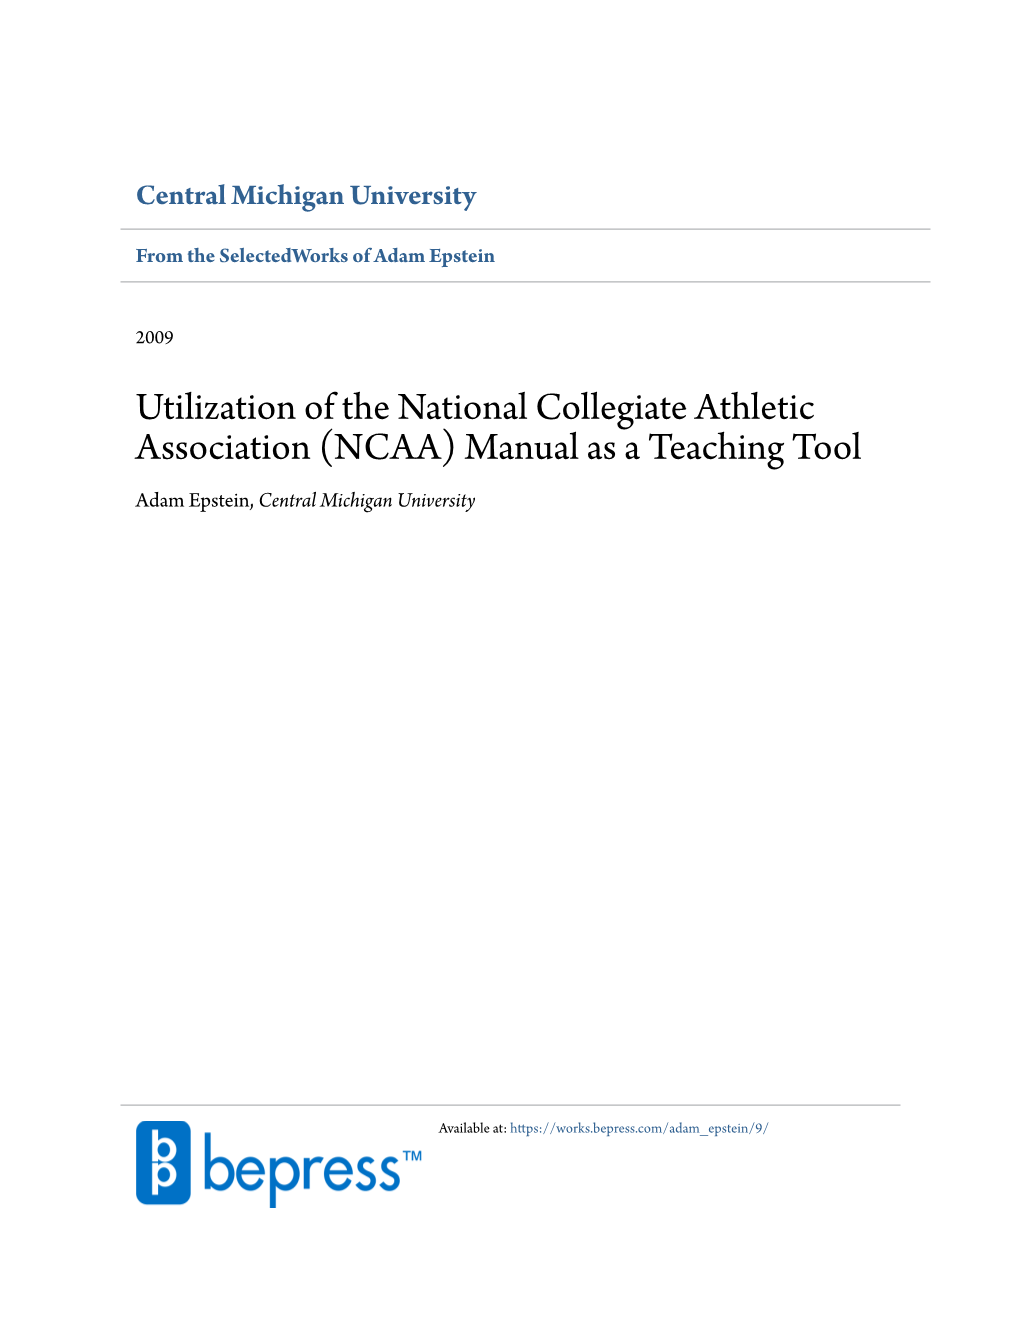 Utilization of the National Collegiate Athletic Association (NCAA) Manual As a Teaching Tool Adam Epstein, Central Michigan University